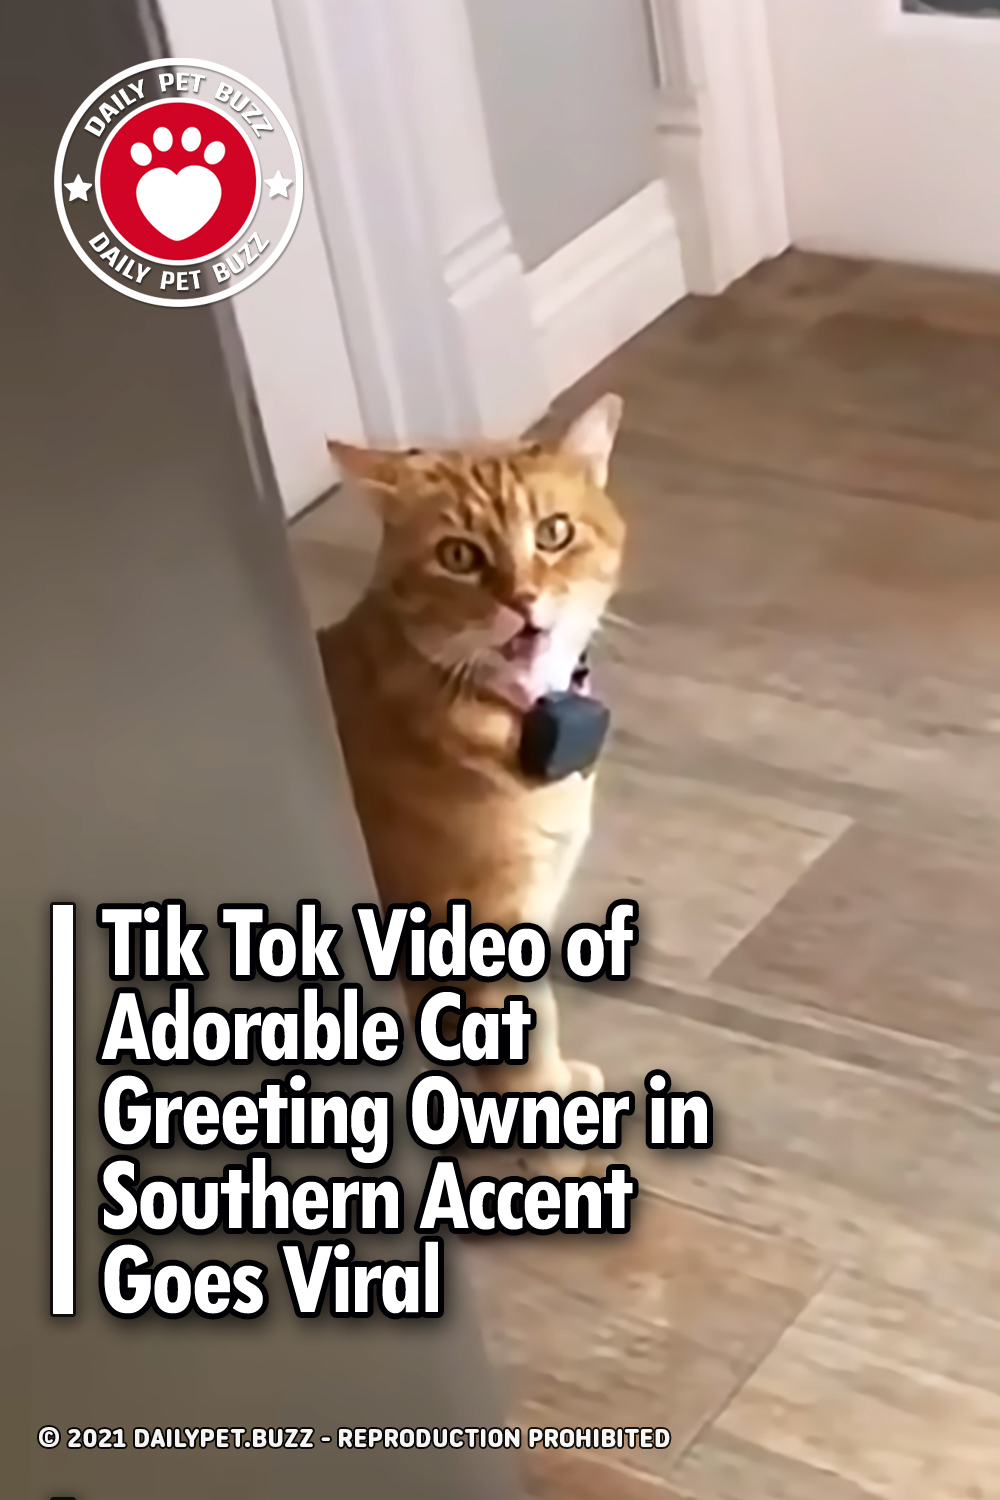 Tik Tok Video of Adorable Cat Greeting Owner in Southern Accent Goes Viral